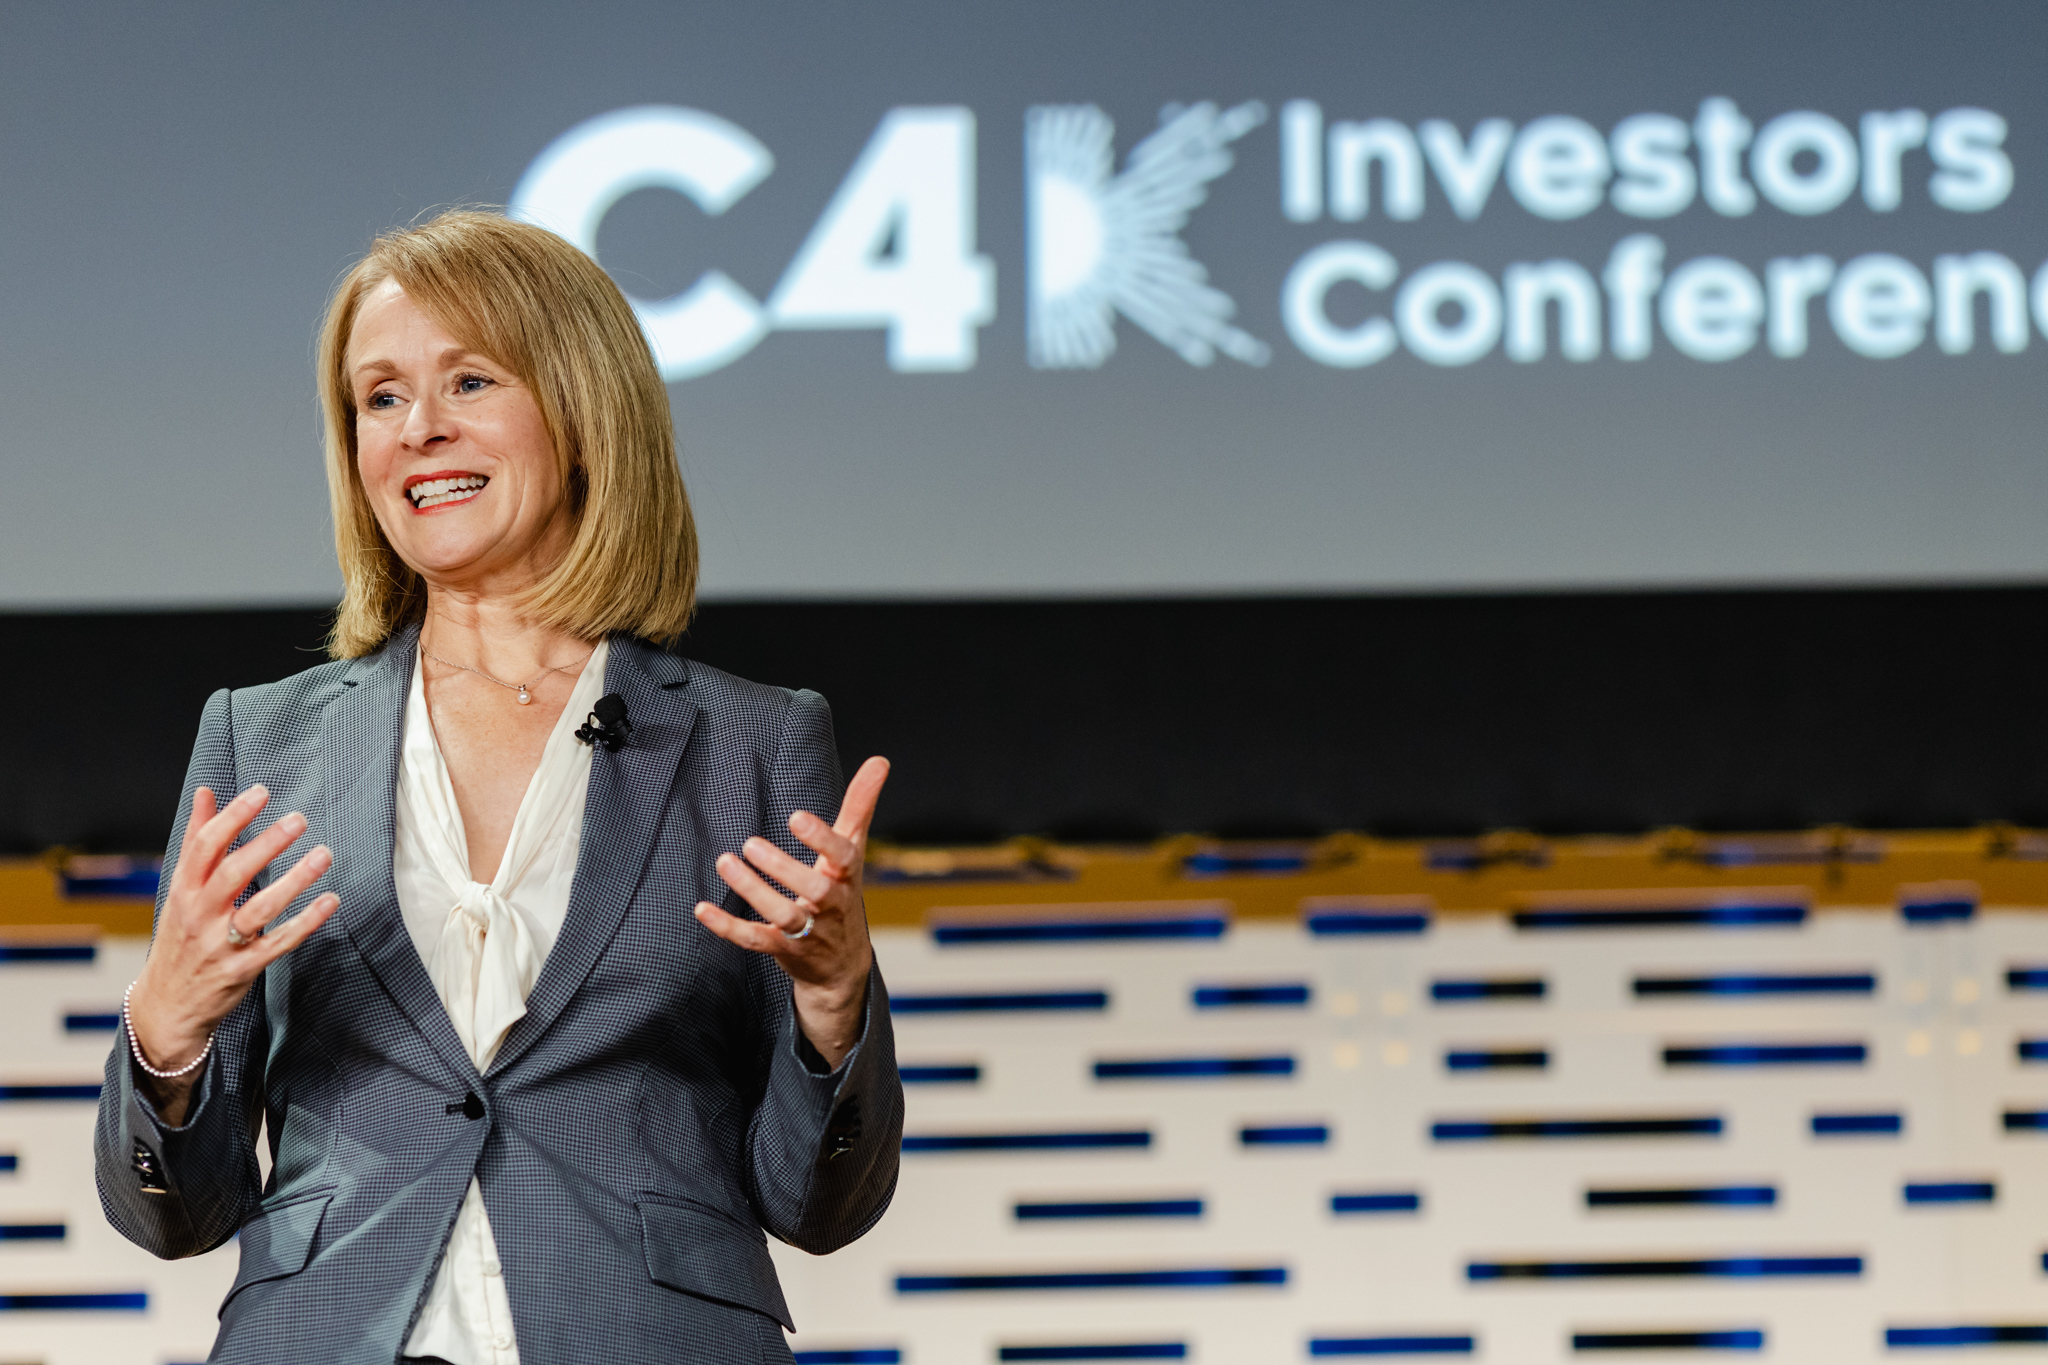 A woman standing in front of a screen at the c4 investors conference.